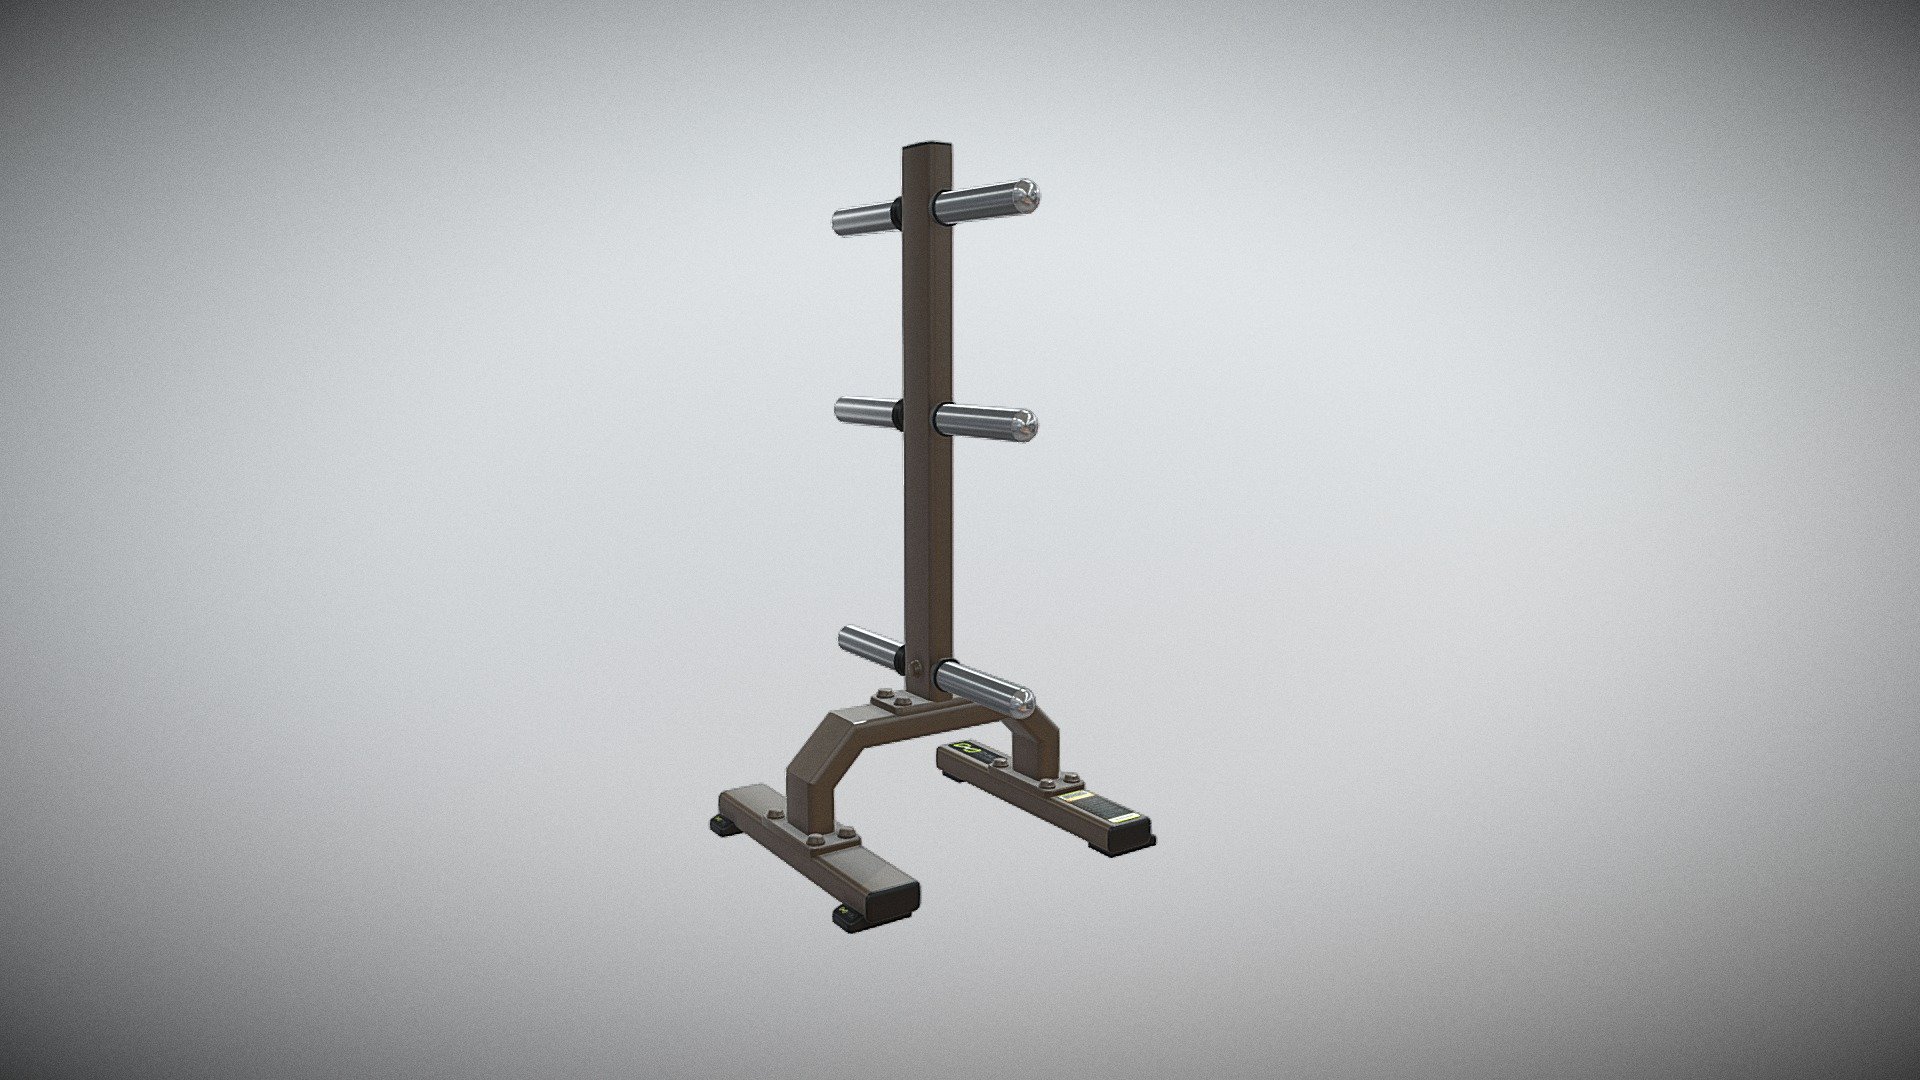 http://dhz-fitness.de/style-1#E1054 - VERTICAL PLATE TREE - 3D model by supersport-fitness 3d model